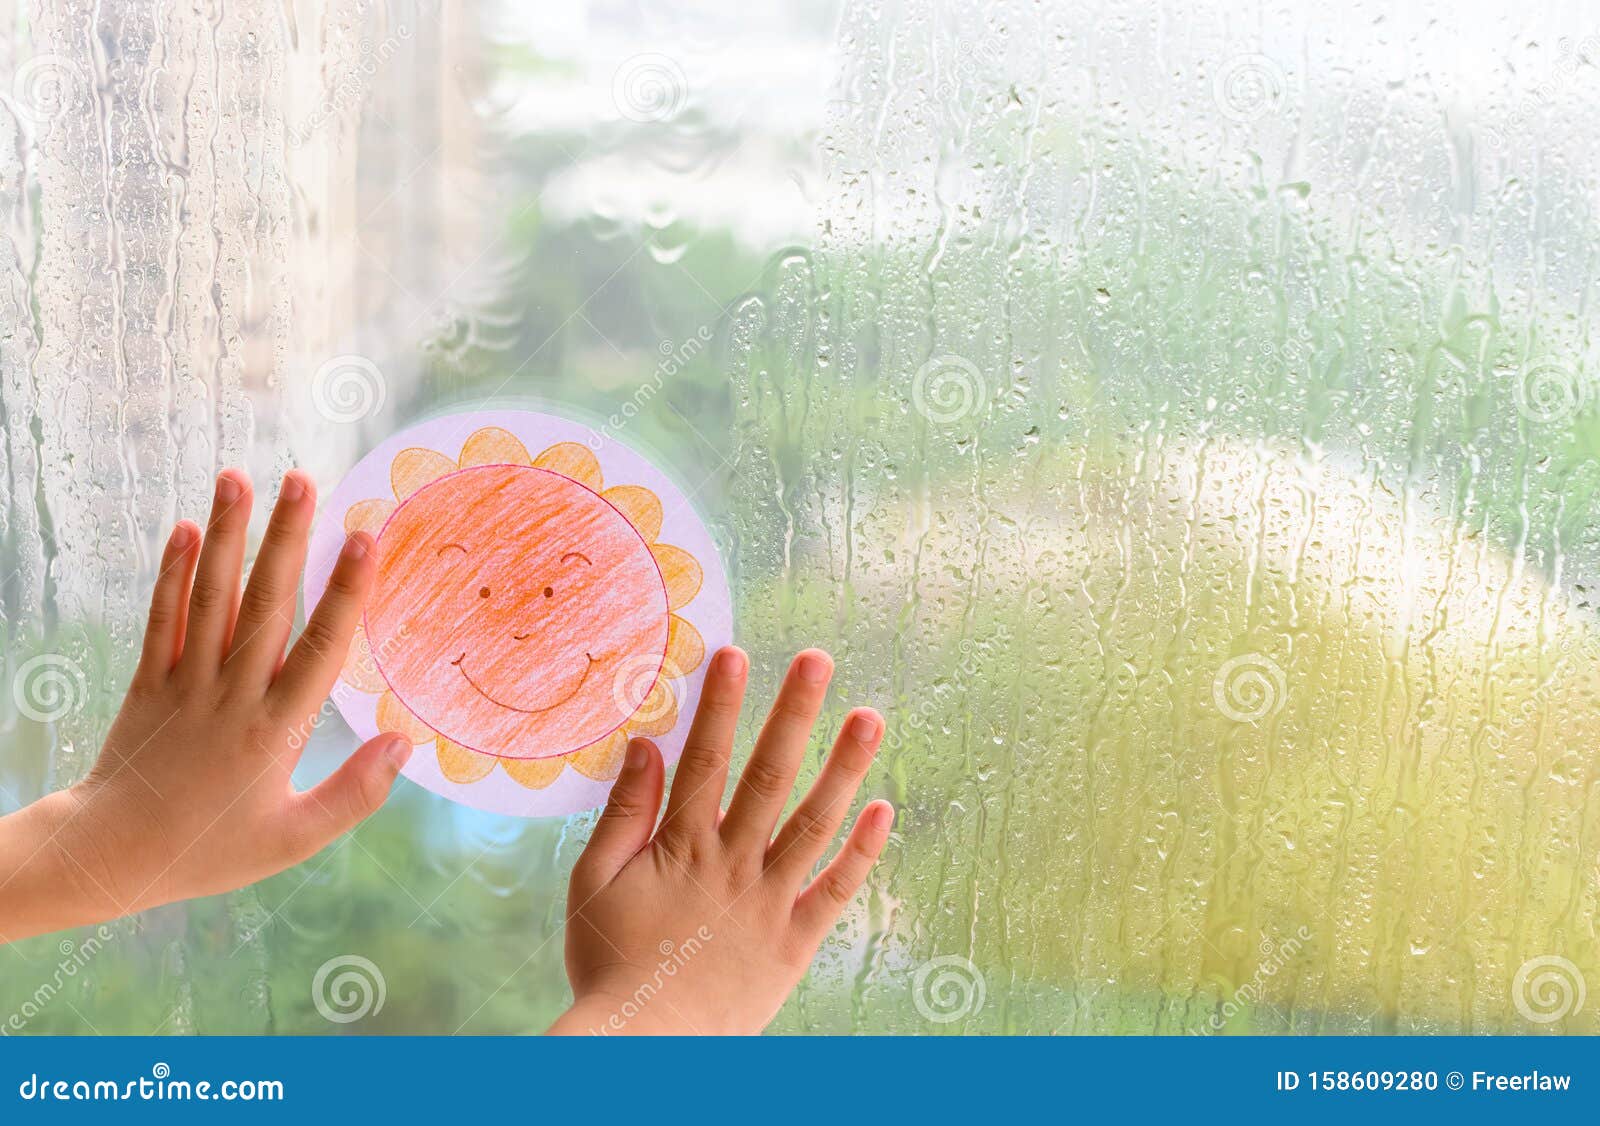 kid holding picture of smiling sun in a raining day concept of faith and optimism